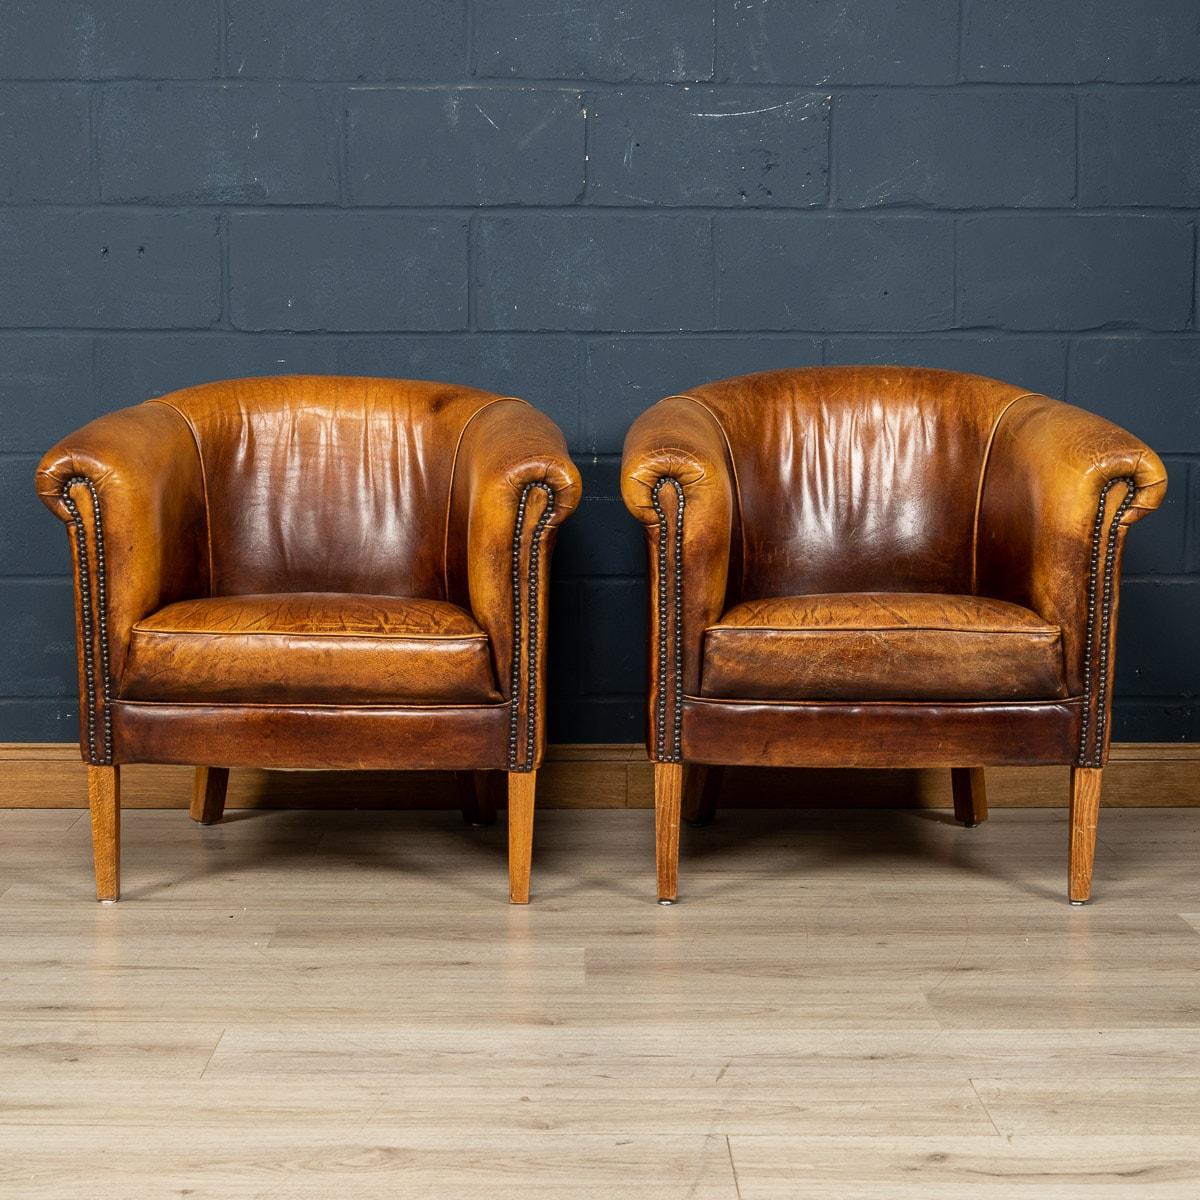 Showing superb patina and colour, this wonderful pair of club chairs were hand upholstered sheepskin leather in Holland by the finest craftsmen in the latter part of the 20th century.

CONDITION
In Good Condition - Some wear consistent with normal